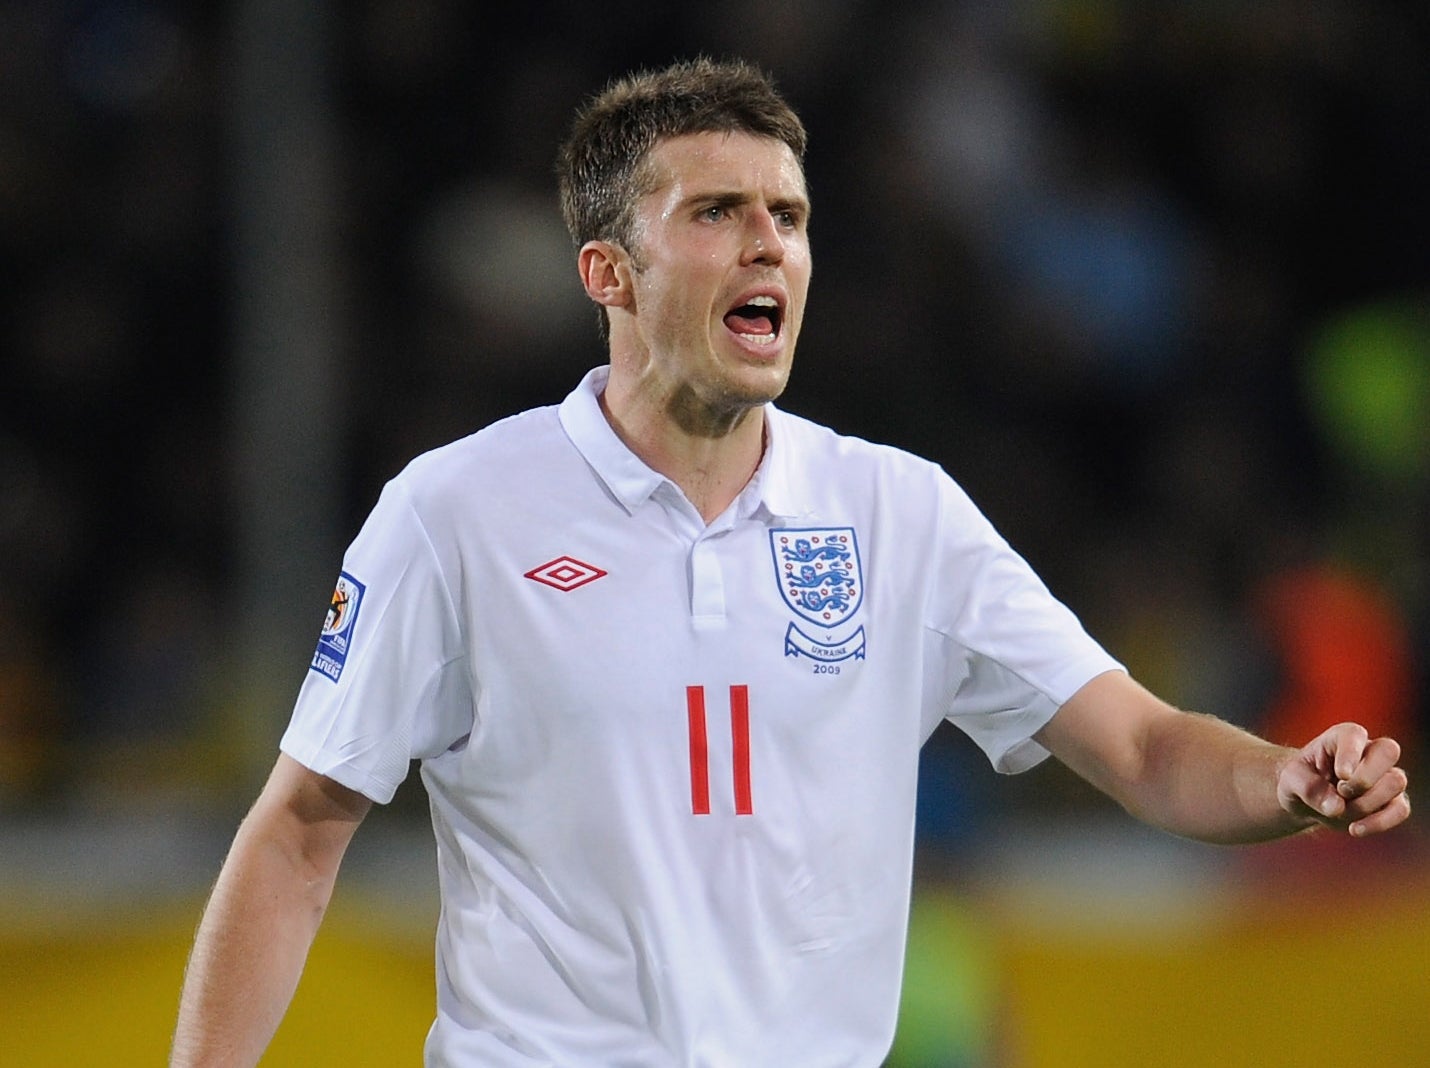 Michael Carrick reveals he asked England not to pick him after becoming depressed